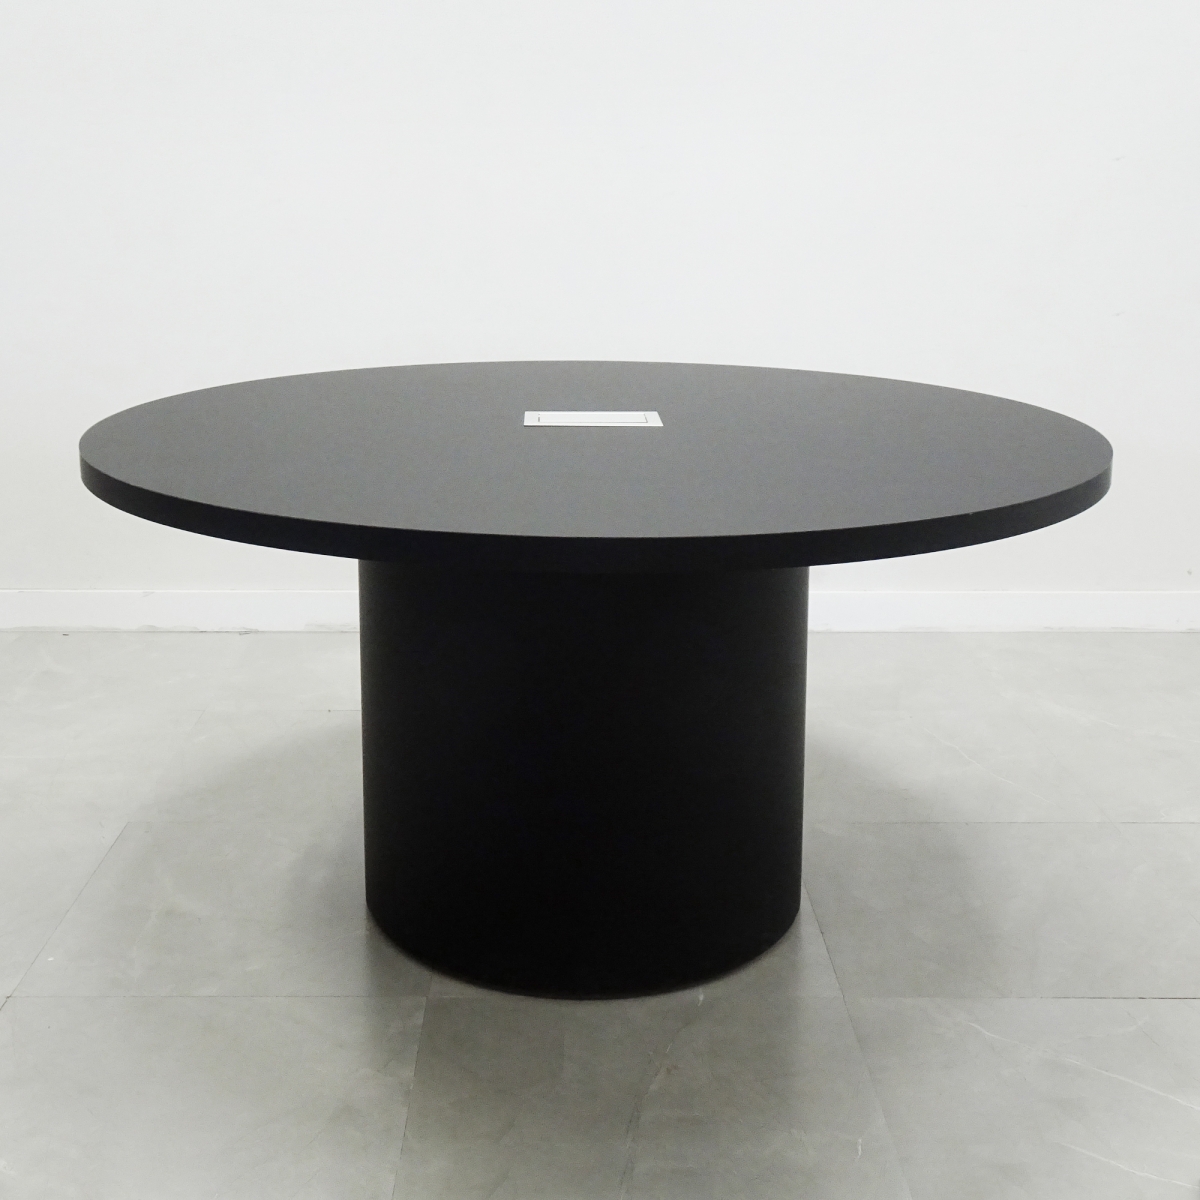 Axis Round Meeting Table With Laminate Top